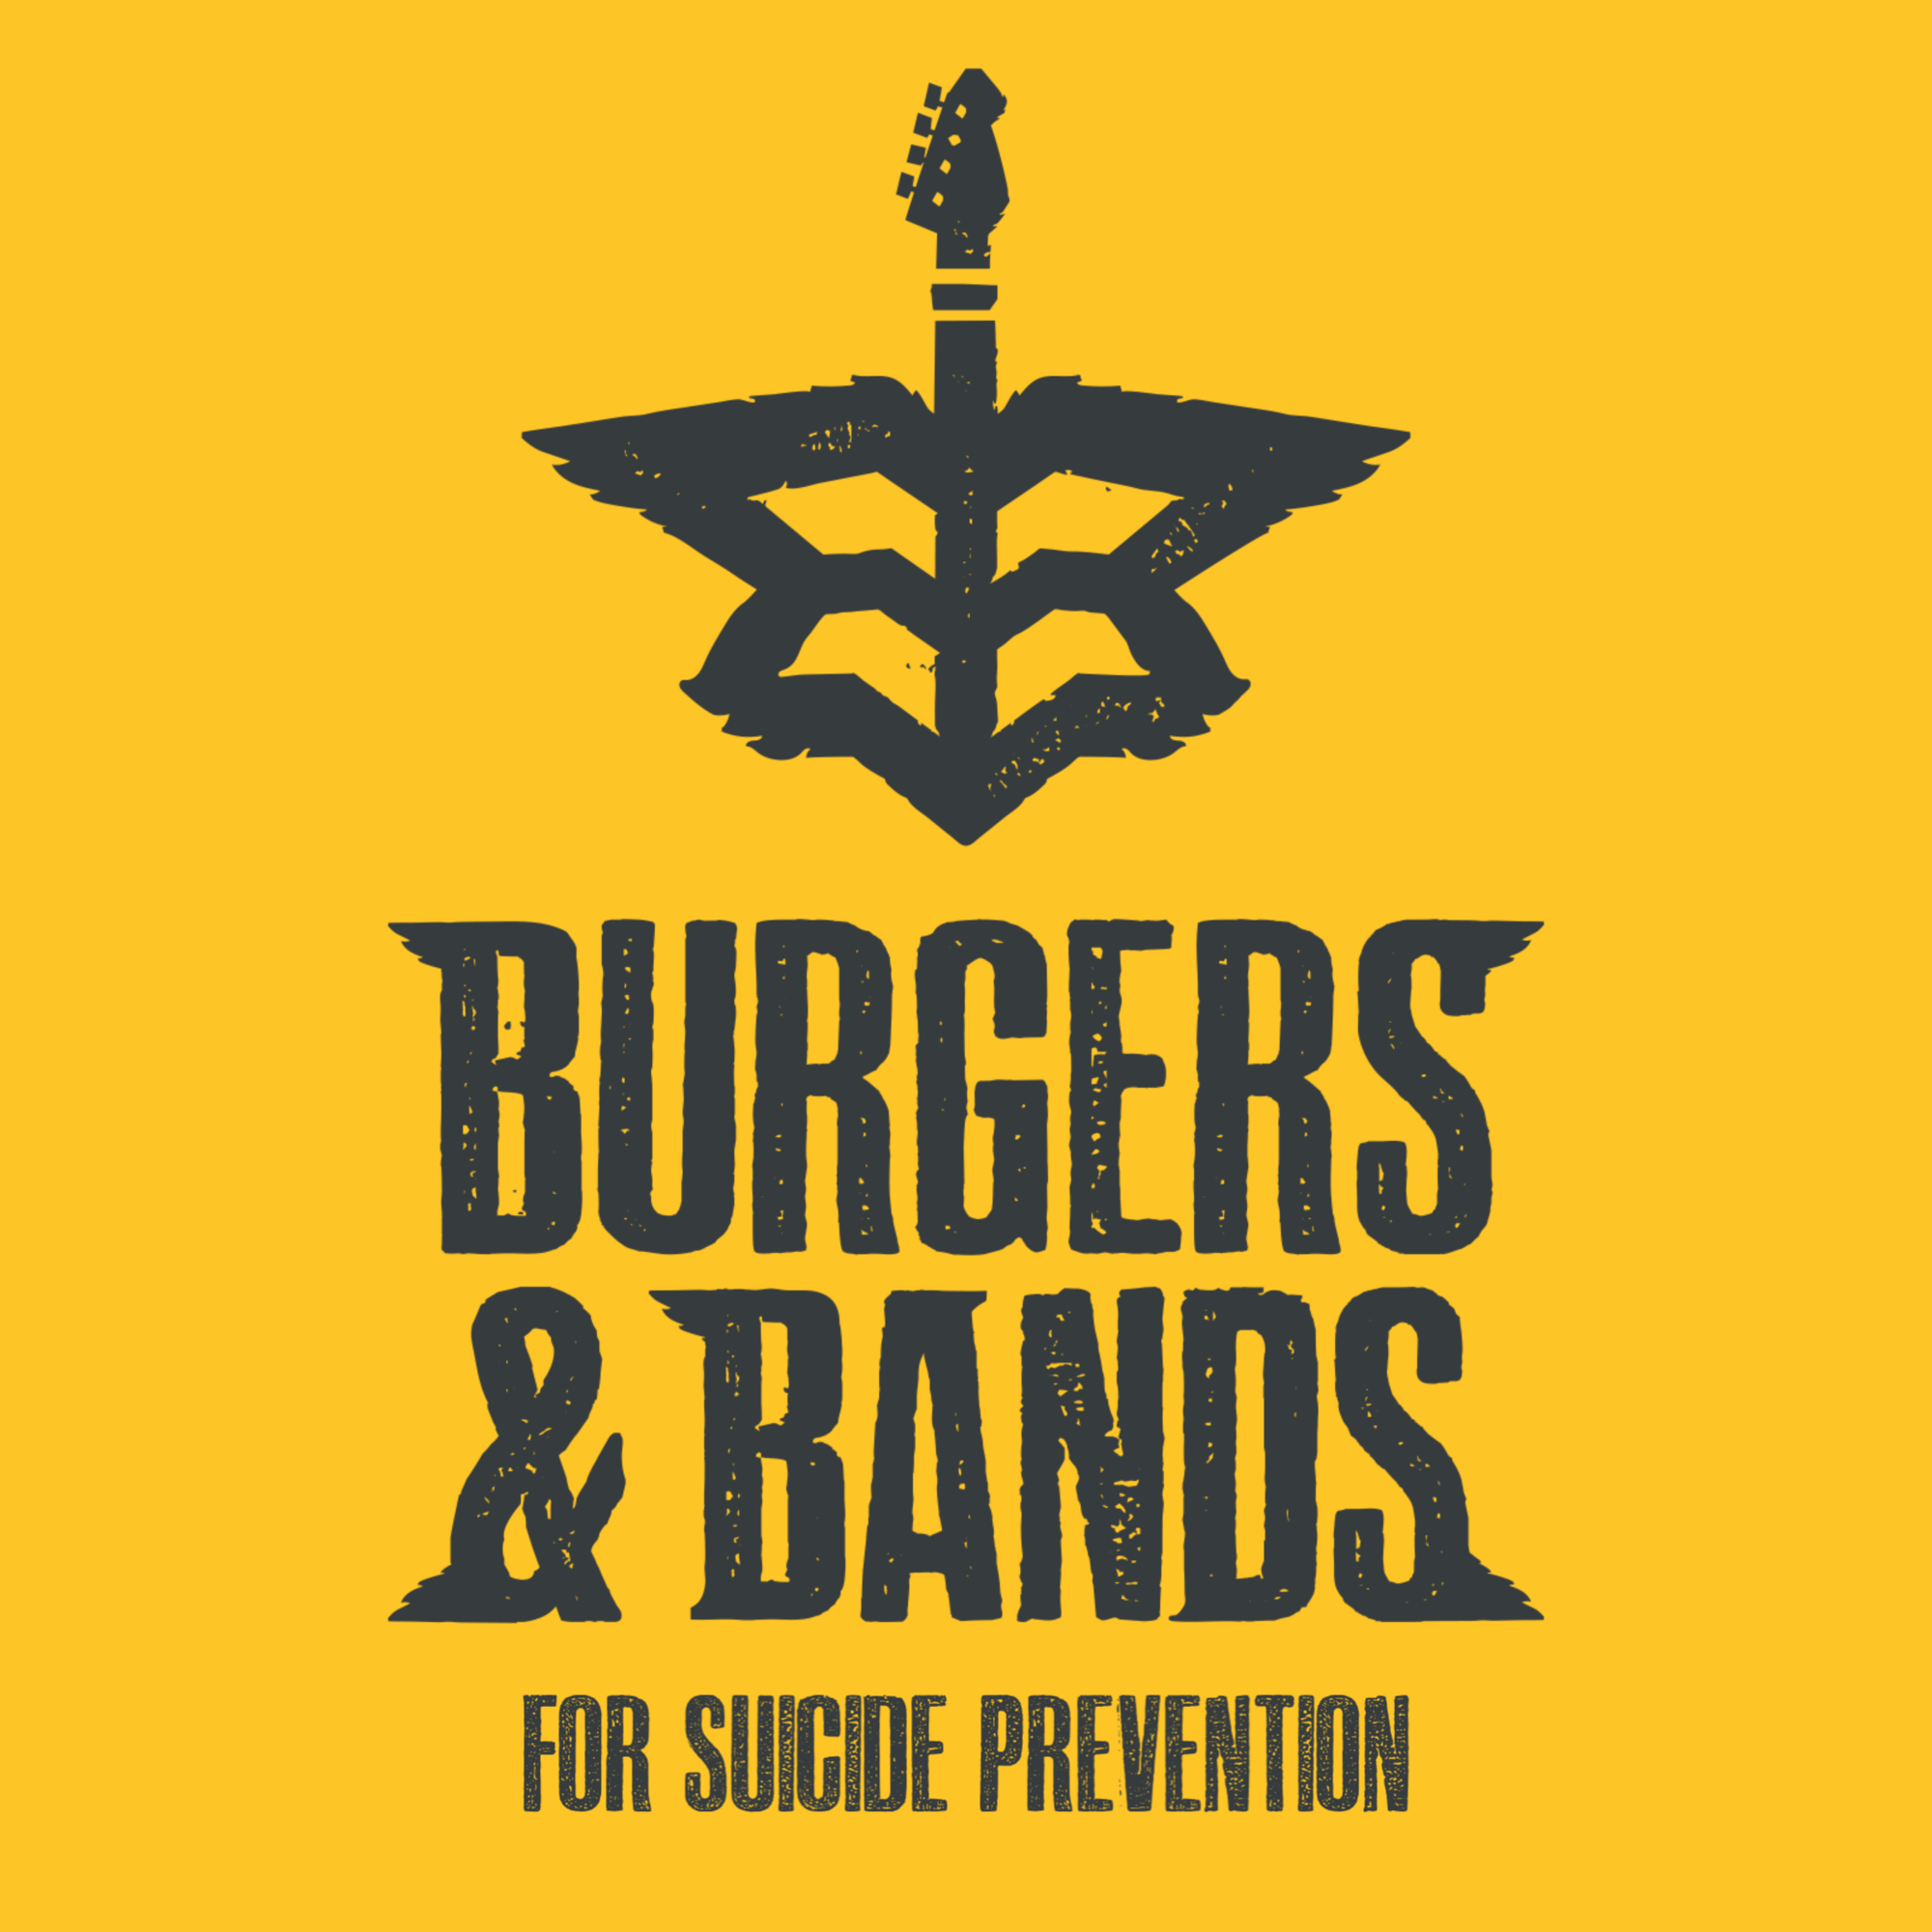 Burgers and Bands